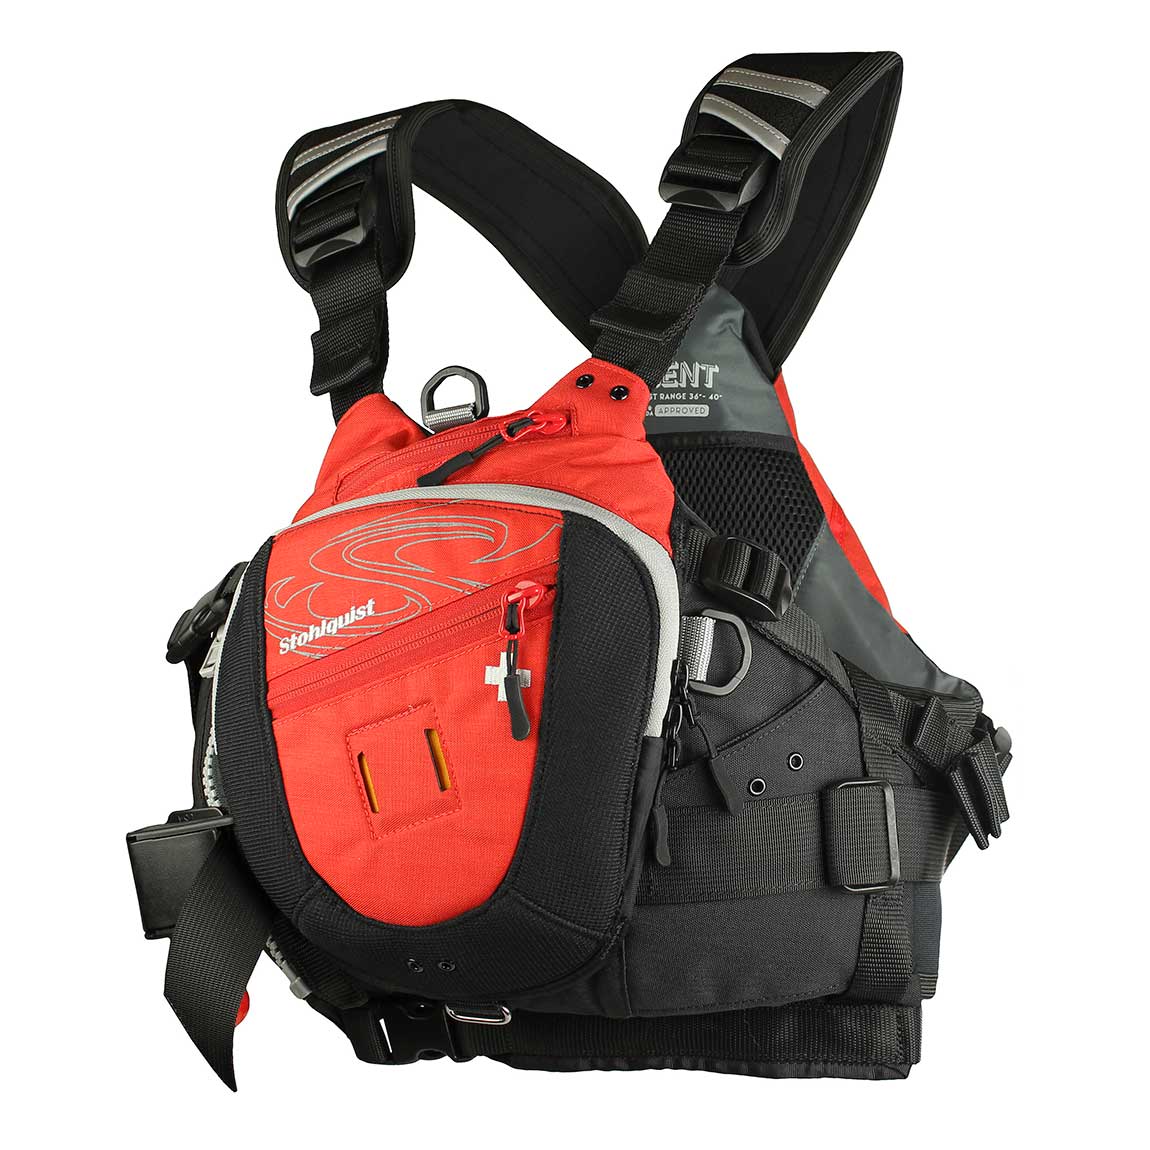 Featuring the Descent Rescue PFD gift for kayaker, gift for rafter, rescue pfd manufactured by Stohlquist shown here from a fourth angle.